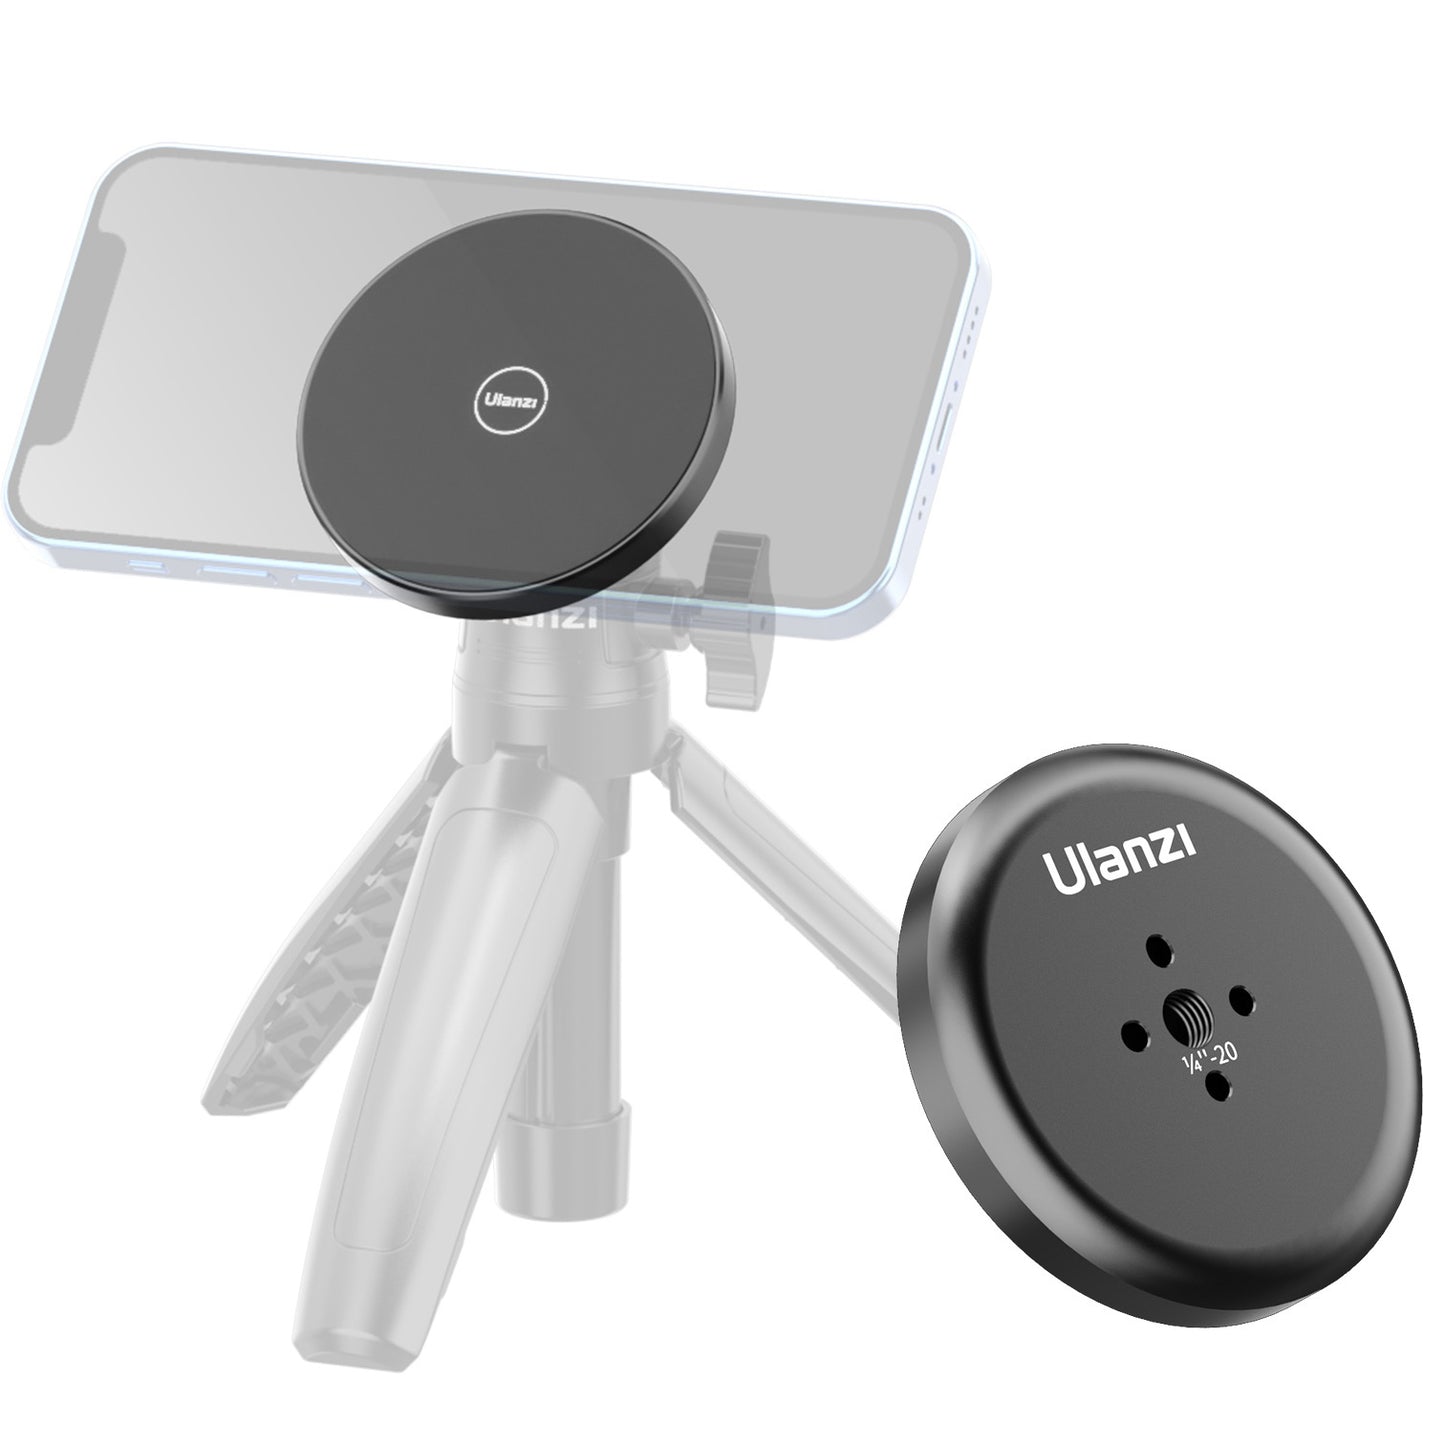 Ulanzi U-R101 magnetic Magsafe mount for tripod – With 1/4 inch screw hole